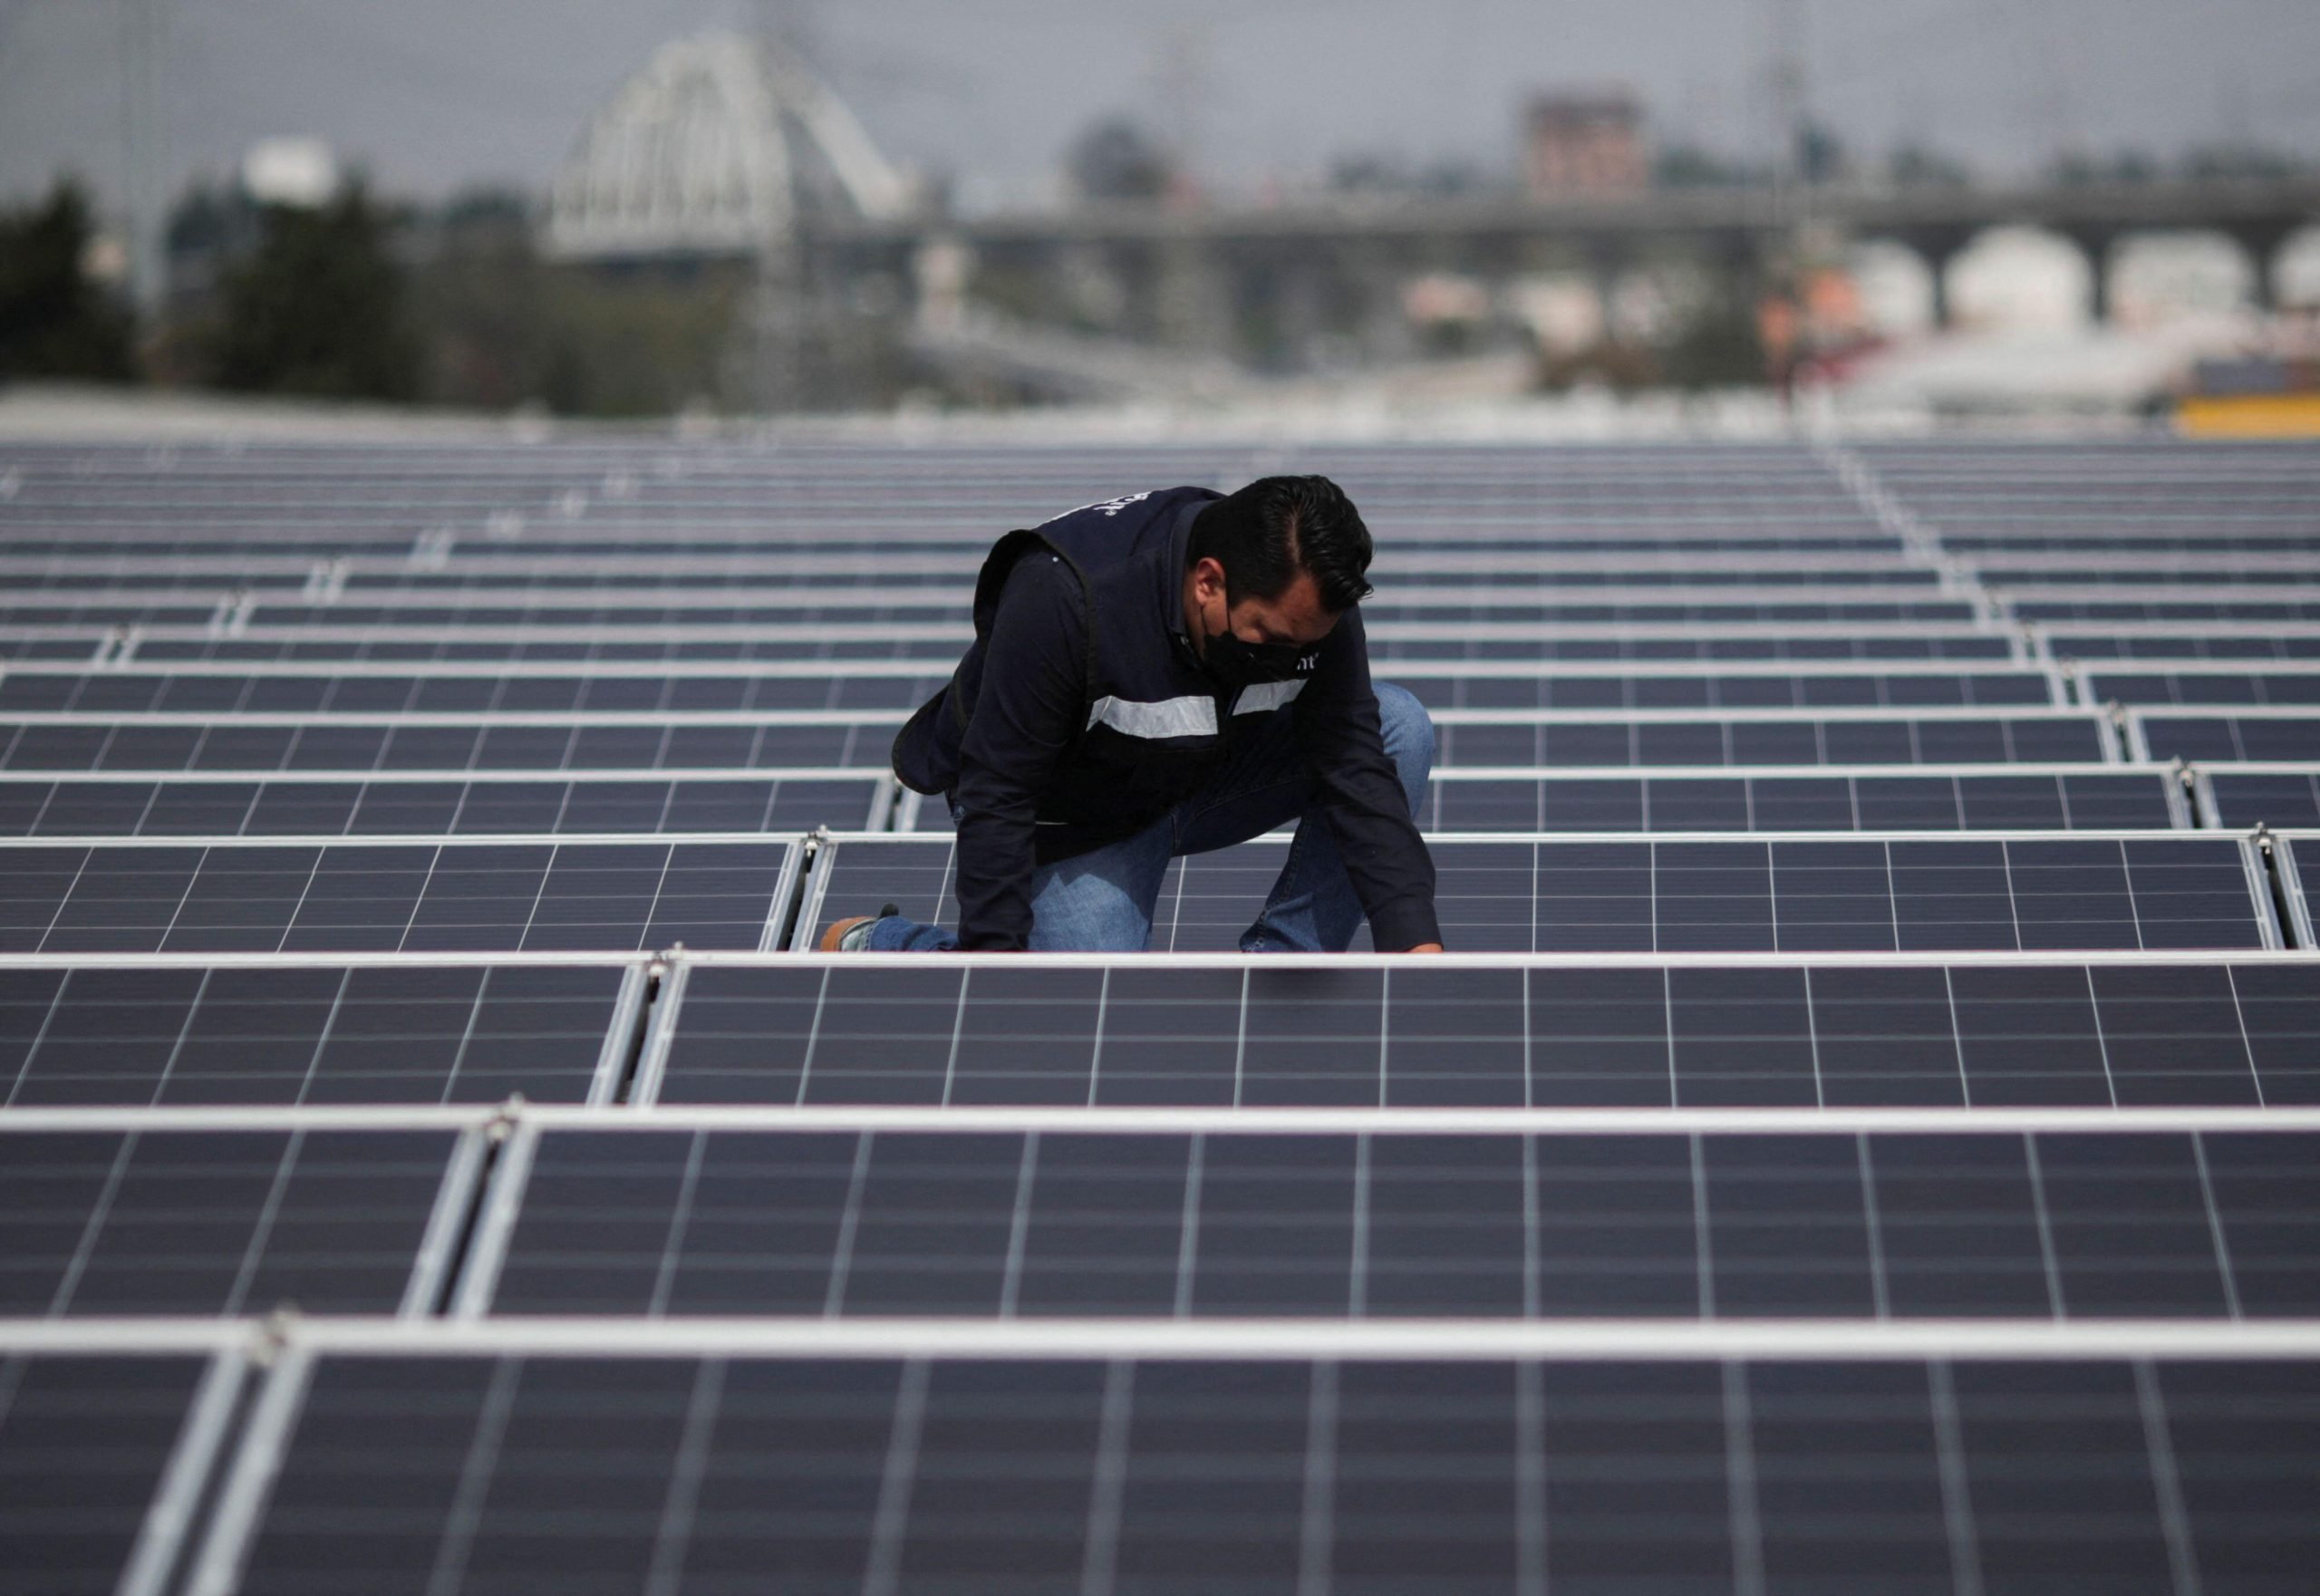 <p>An engineer installs a solar panel in Mexico in August this year. Regionally, it is <a href="https://wedocs.unep.org/handle/20.500.11822/34532">estimated</a> that US$621 billion could be saved by reaching net zero in the energy and transport sector alone. (Image: Henry Romero / Alamy)</p>